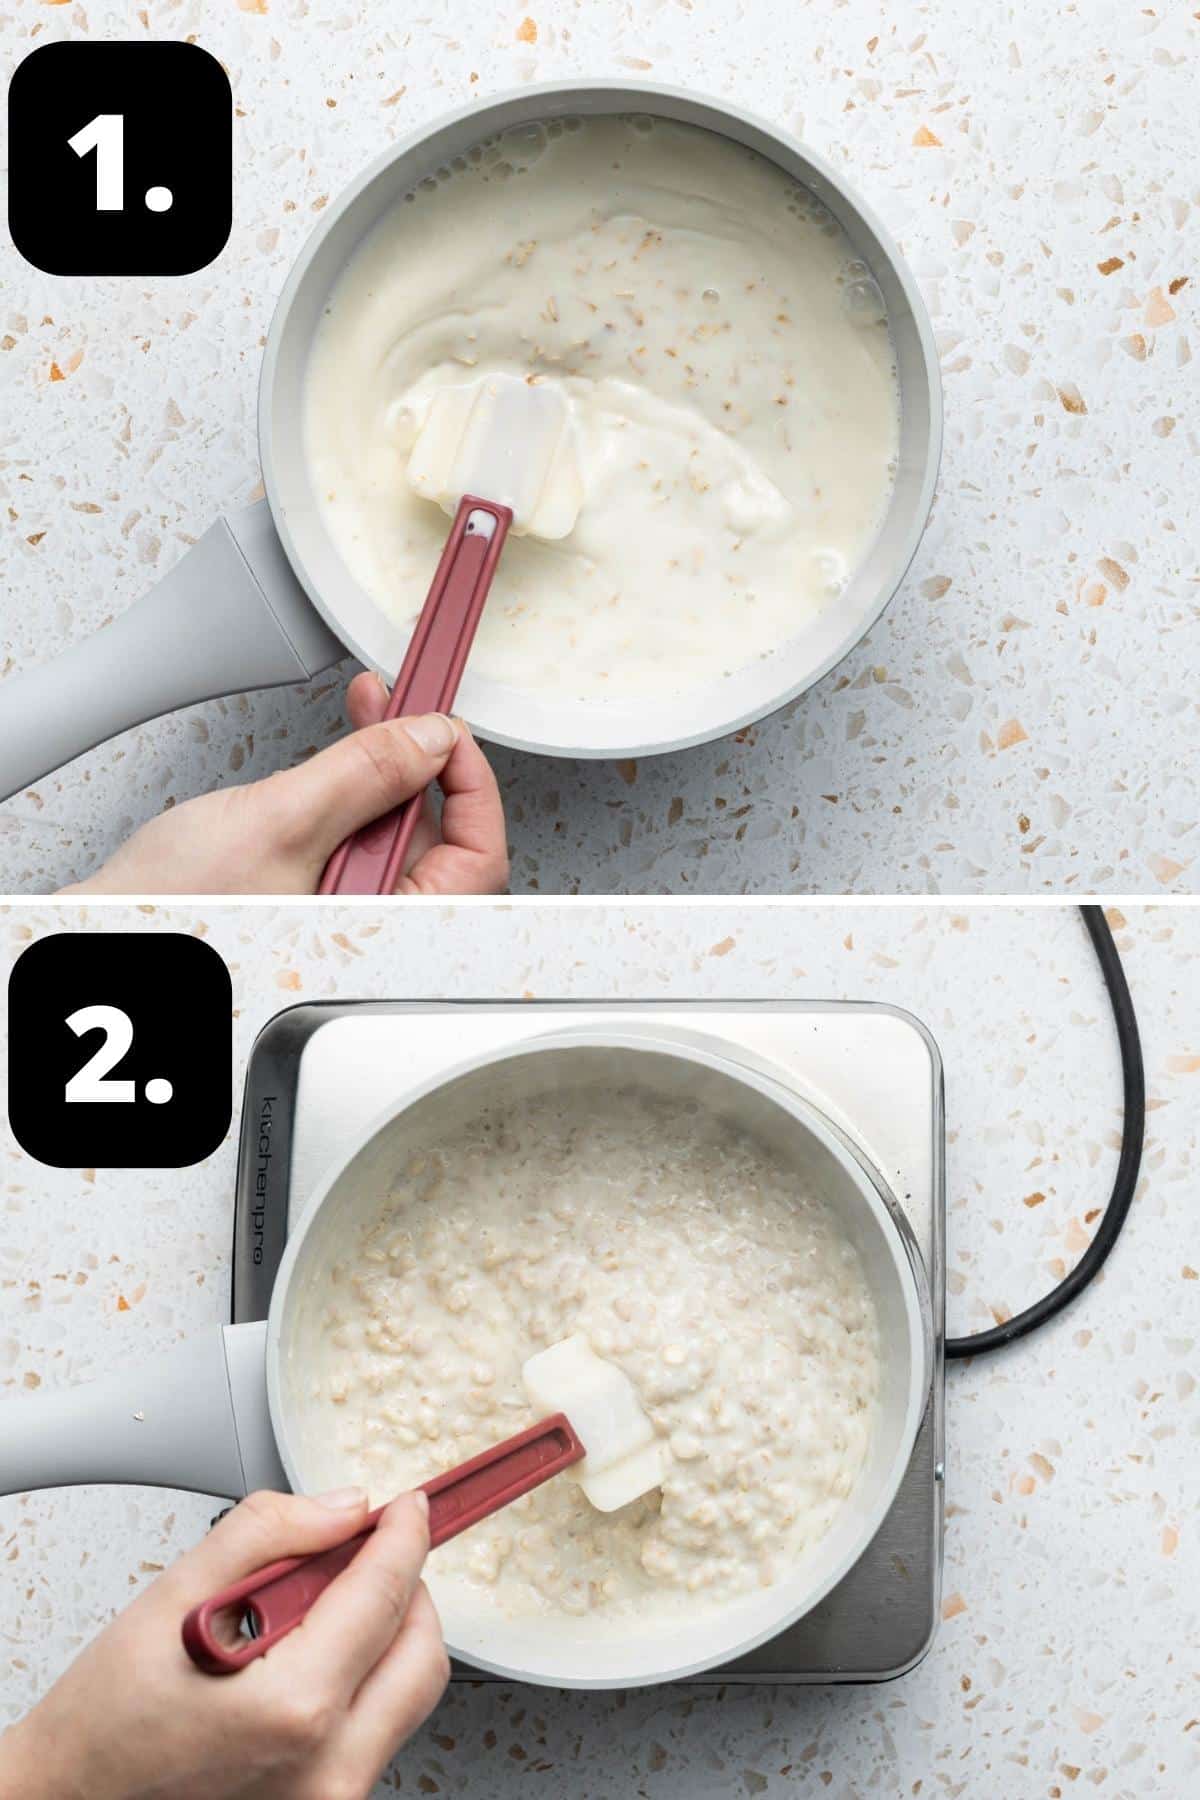 Steps 1-2 of preparing this recipe - the ingredients in a saucepan and cooking the porridge.